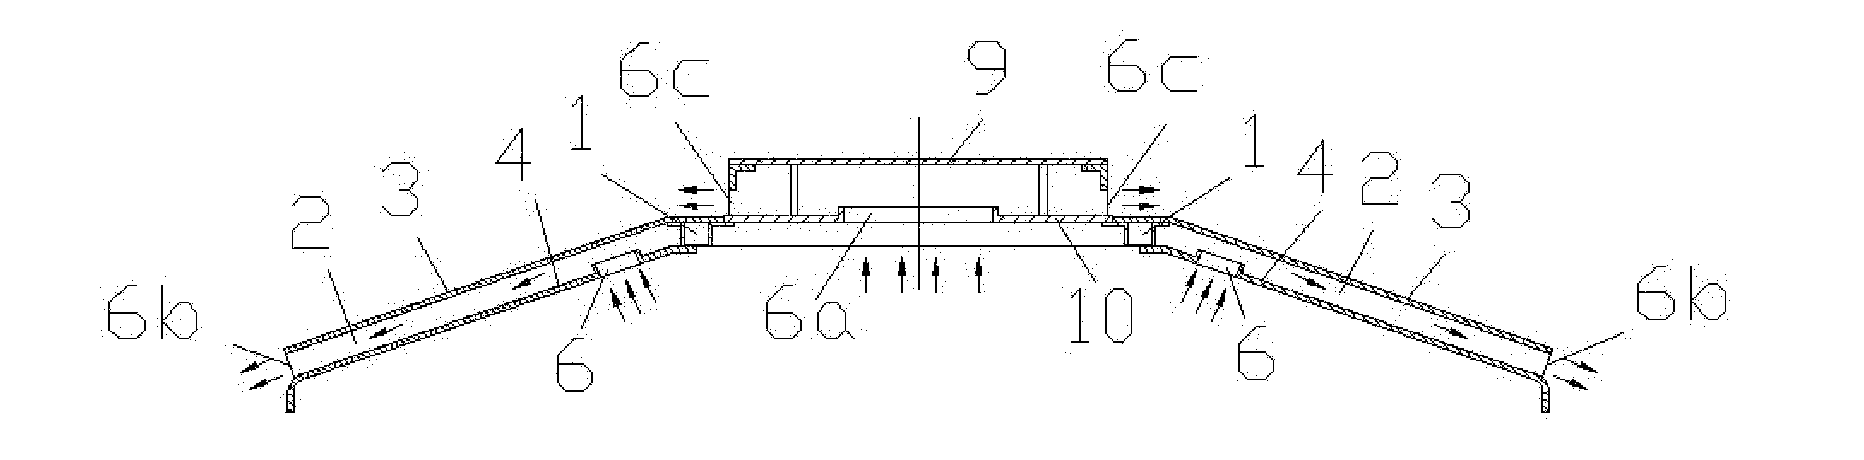 Double-layer top layer of shunting locomotive